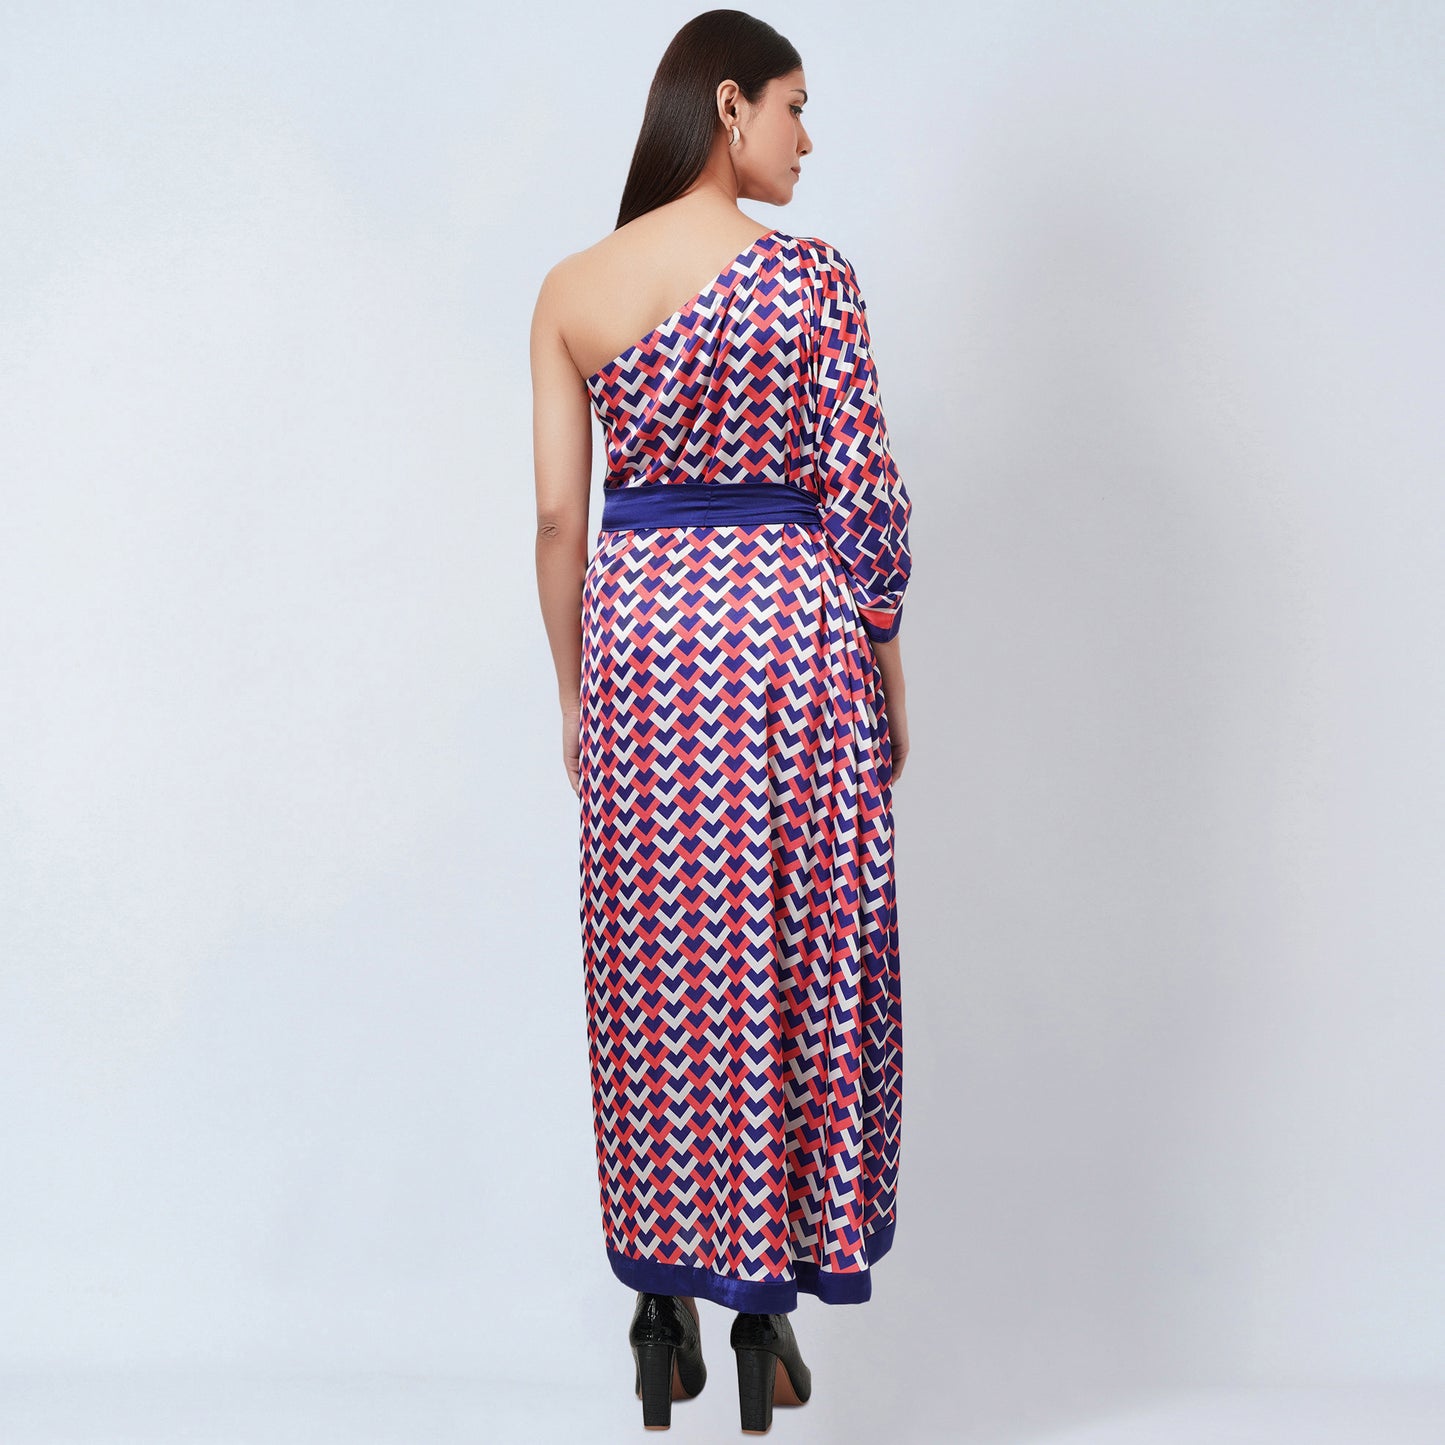 Coral Pink and Blue One-Shoulder Geometric Print Dress